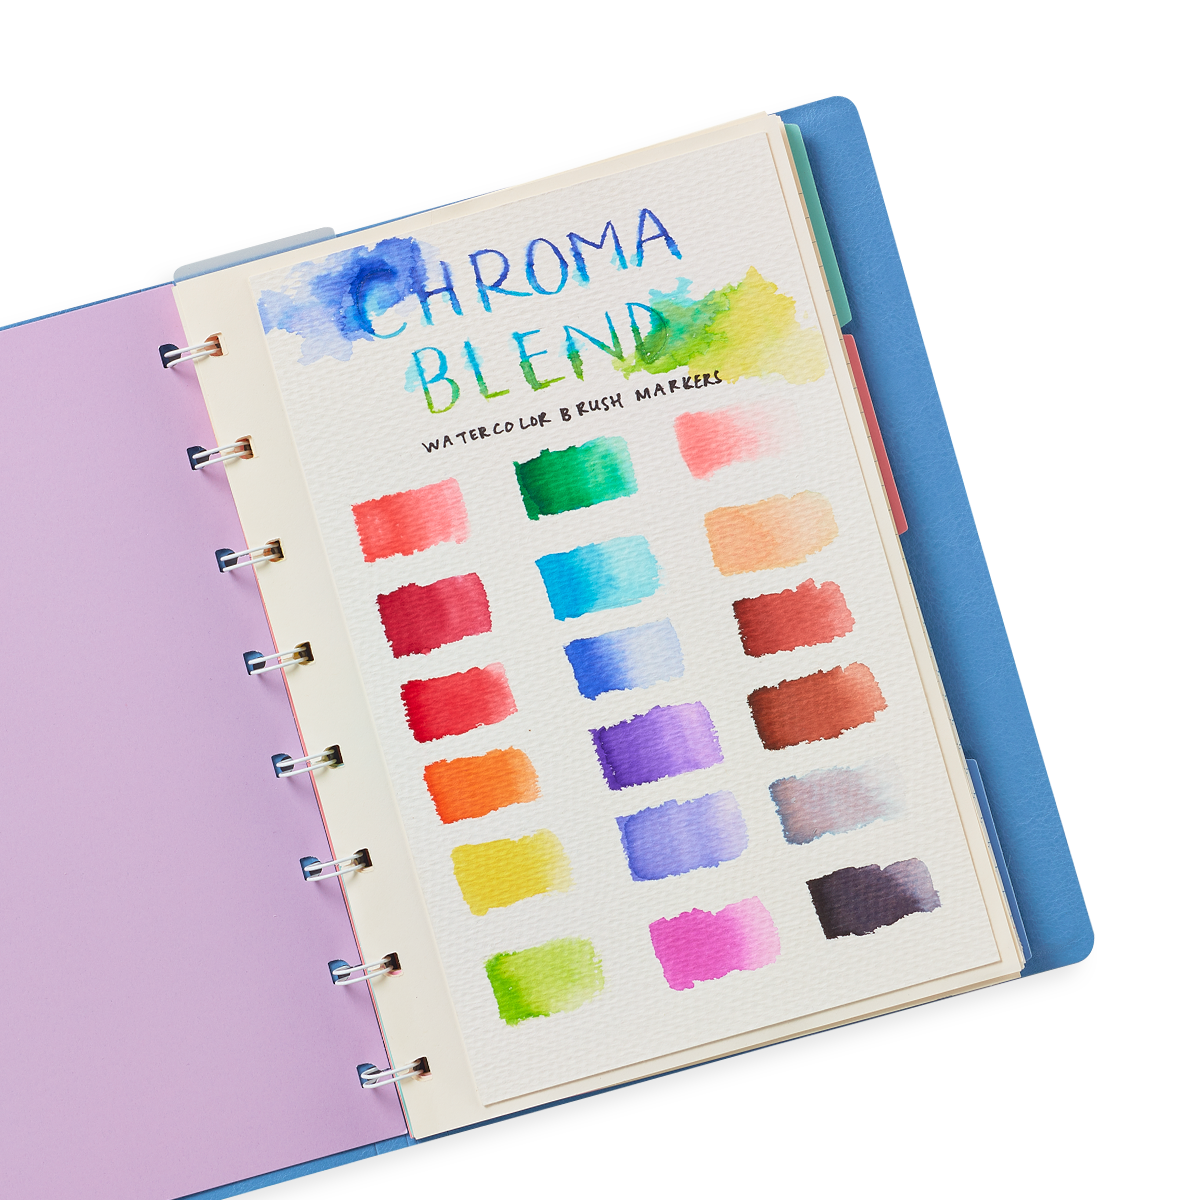 Chroma Blends Watercolor Markers colors swatched in a sketchbook